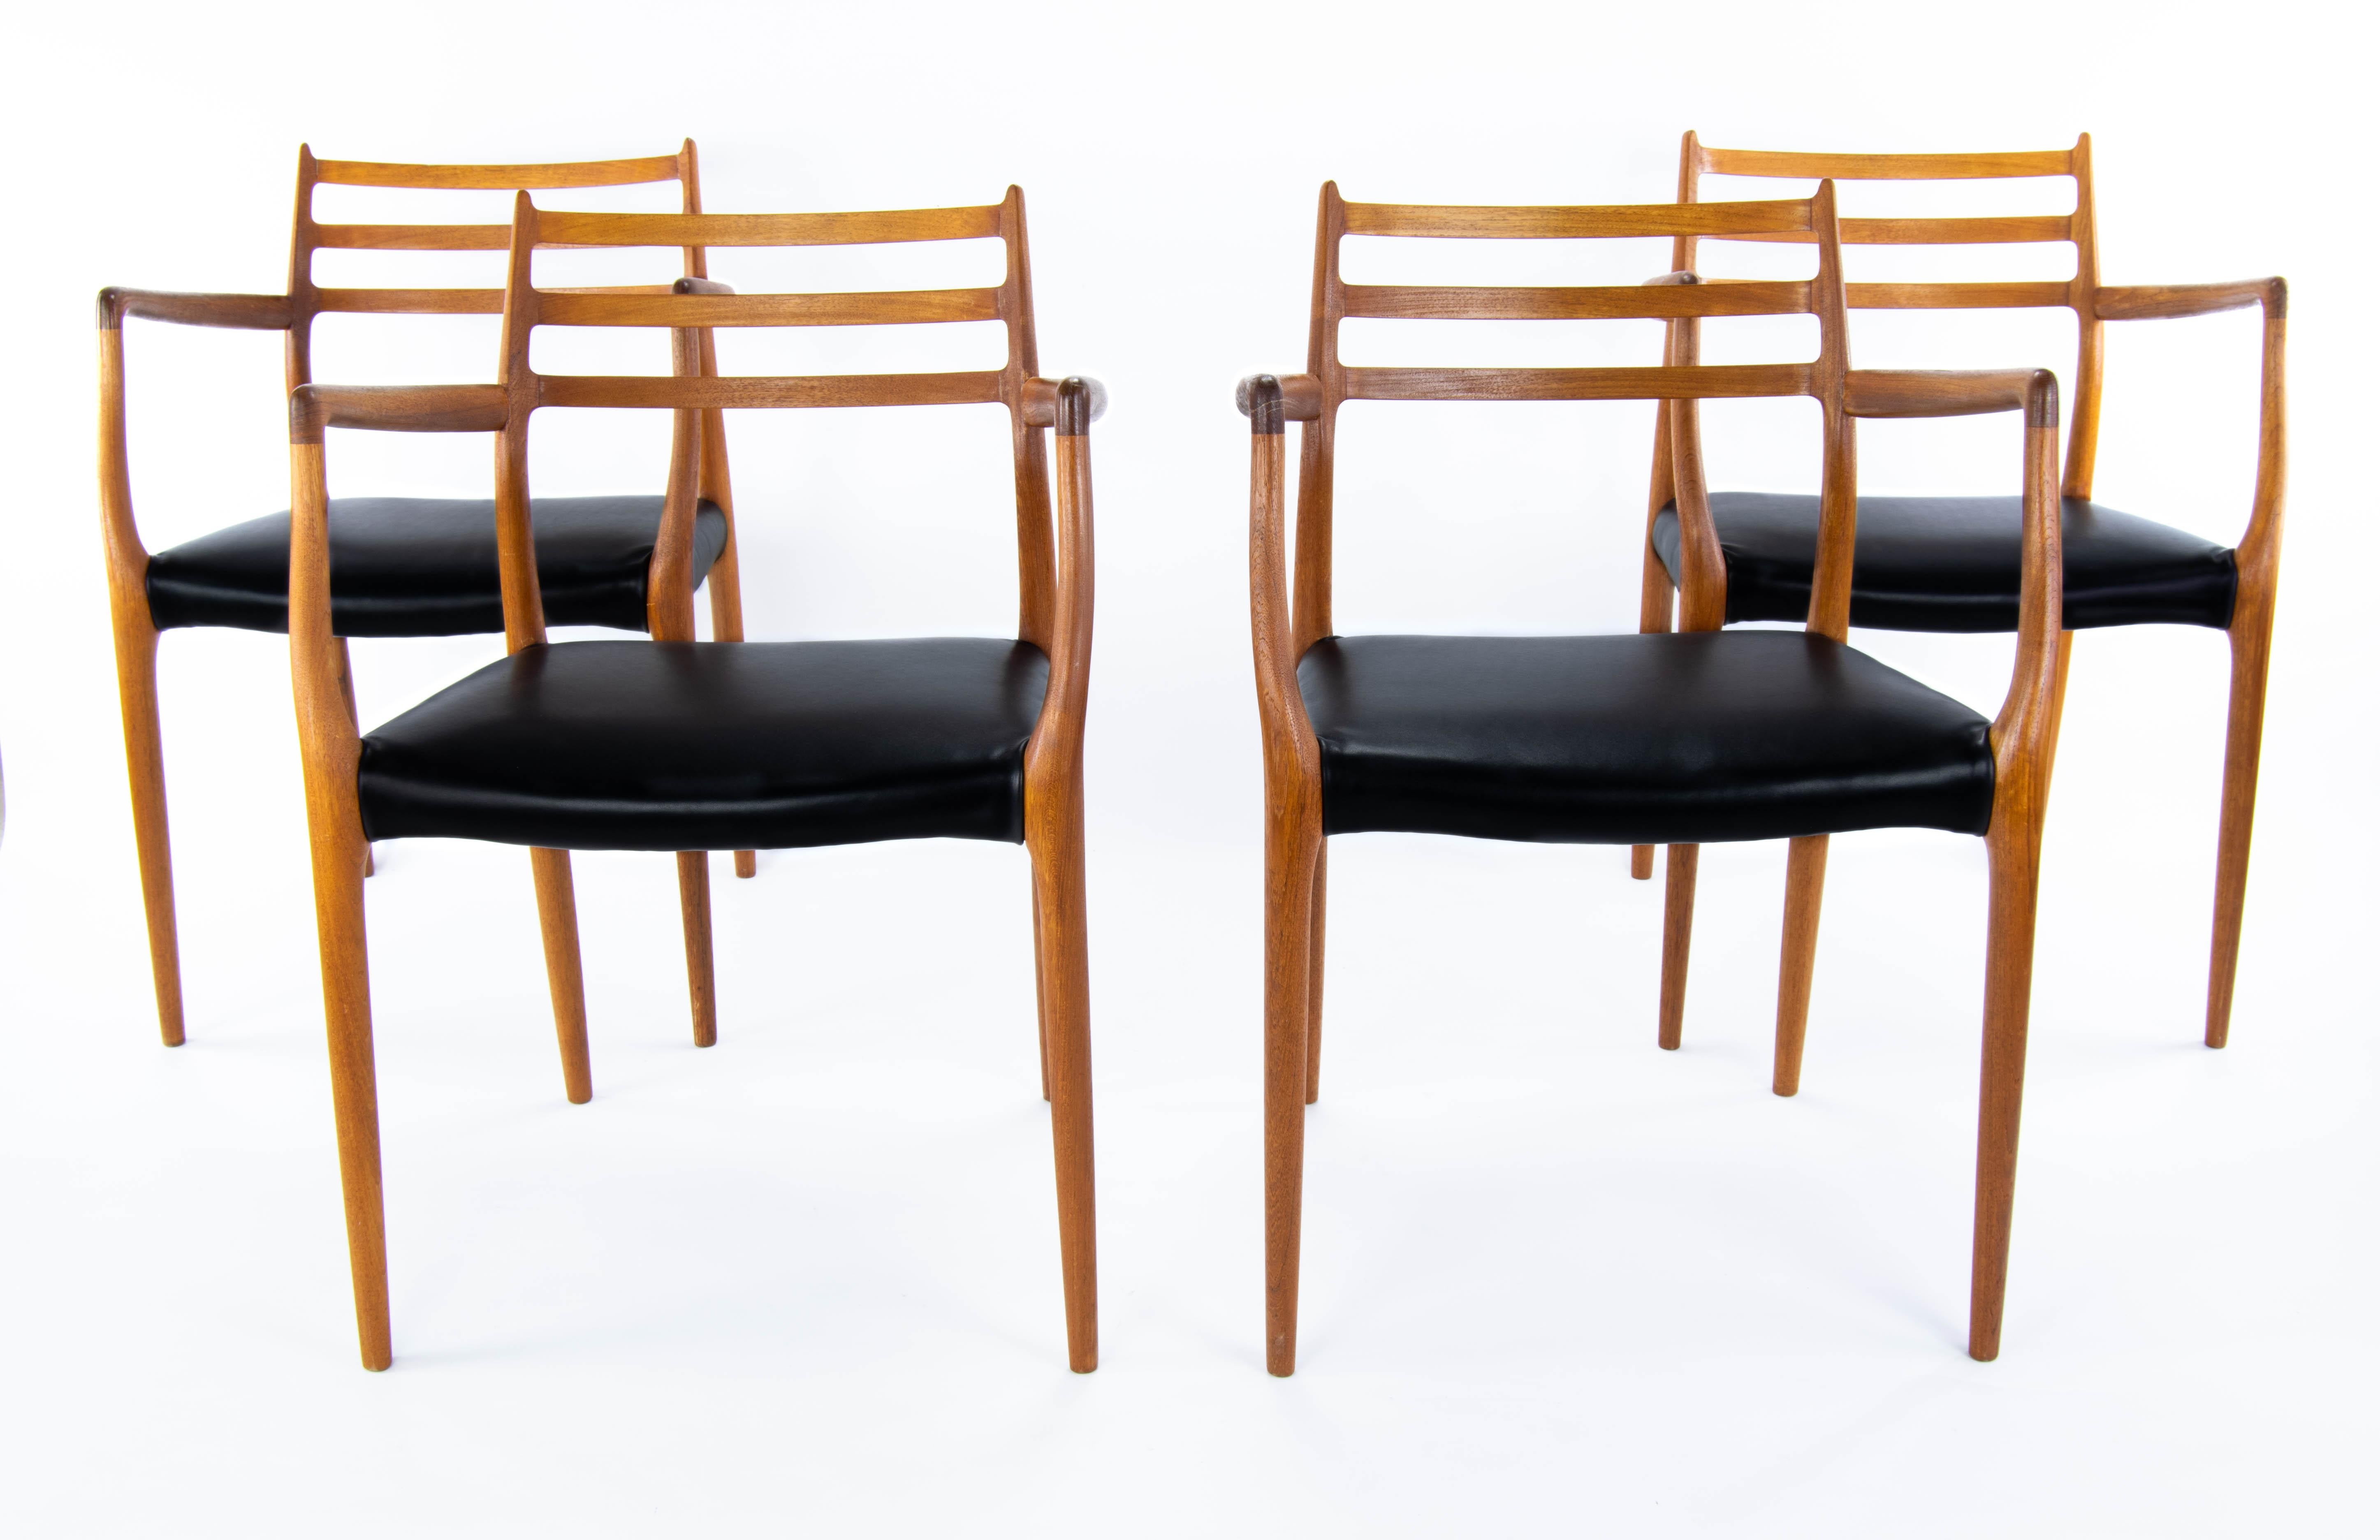 Model 62 dining armchairs, 1962.
Set of four teak dining chairs designed by Niels O. Møller for J.L. Moller Mobelfabrik, Denmark, 1962. Seats reupholstered in premium black leather.
Very good conditions.
Measurements:
Total height 80.5 cm
High seat